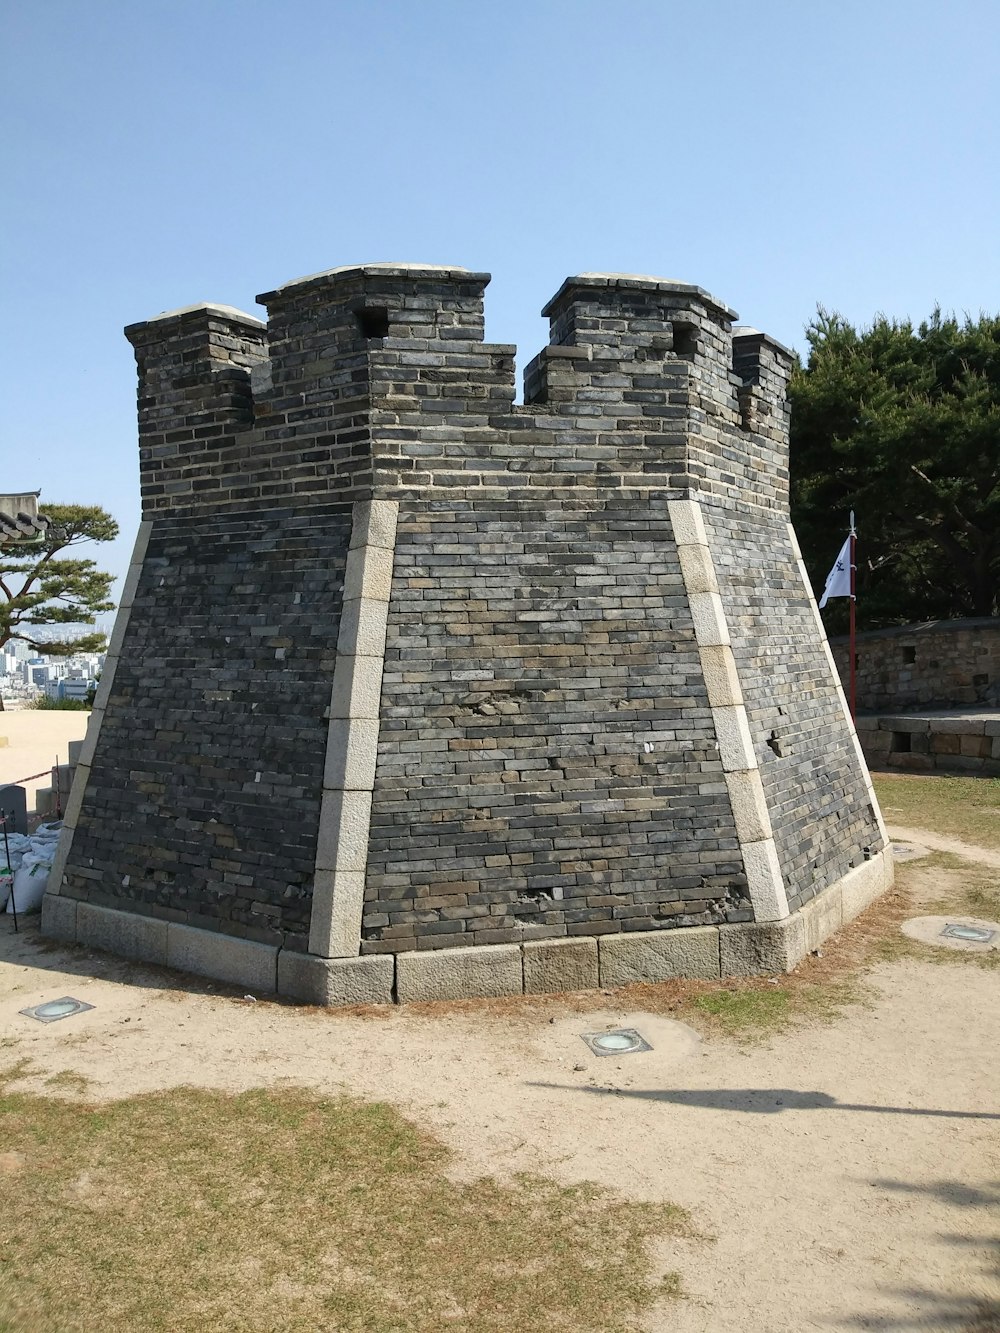 a stone wall with two towers on top of it